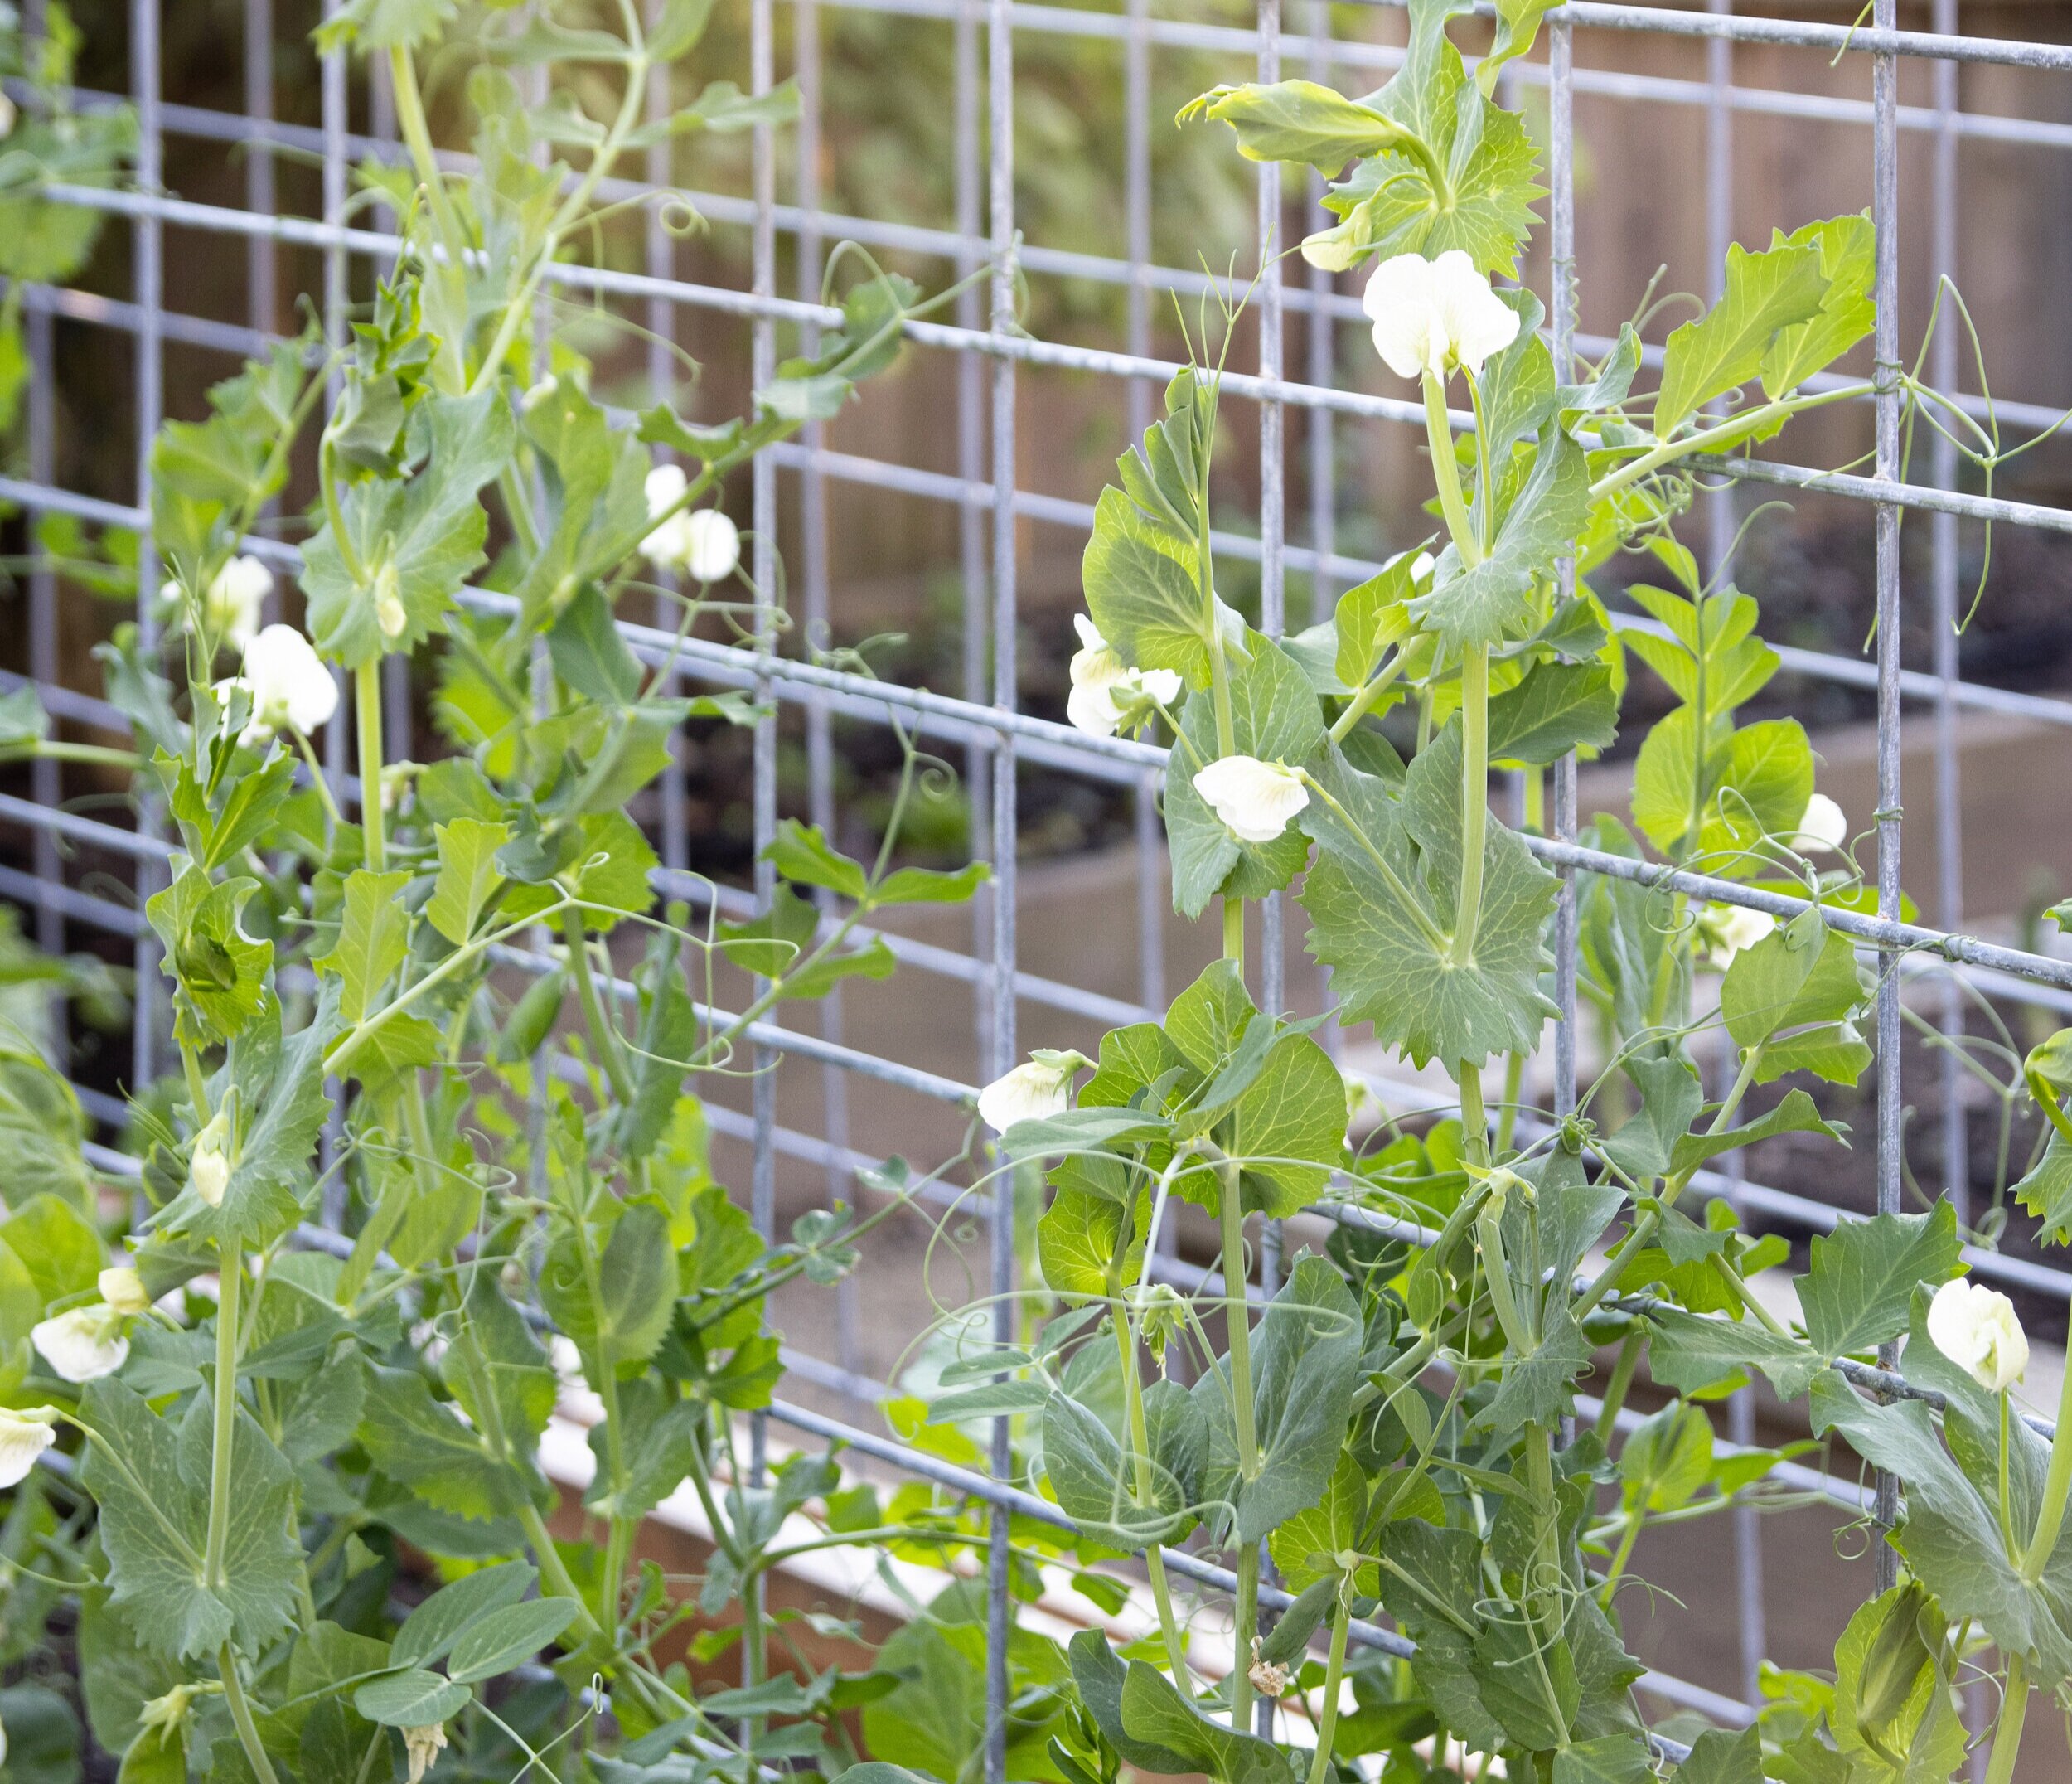 Sweet peas add beauty, an incredible scent, and fresh produce to this edible backyard. Photo by @urbanfarmstead.